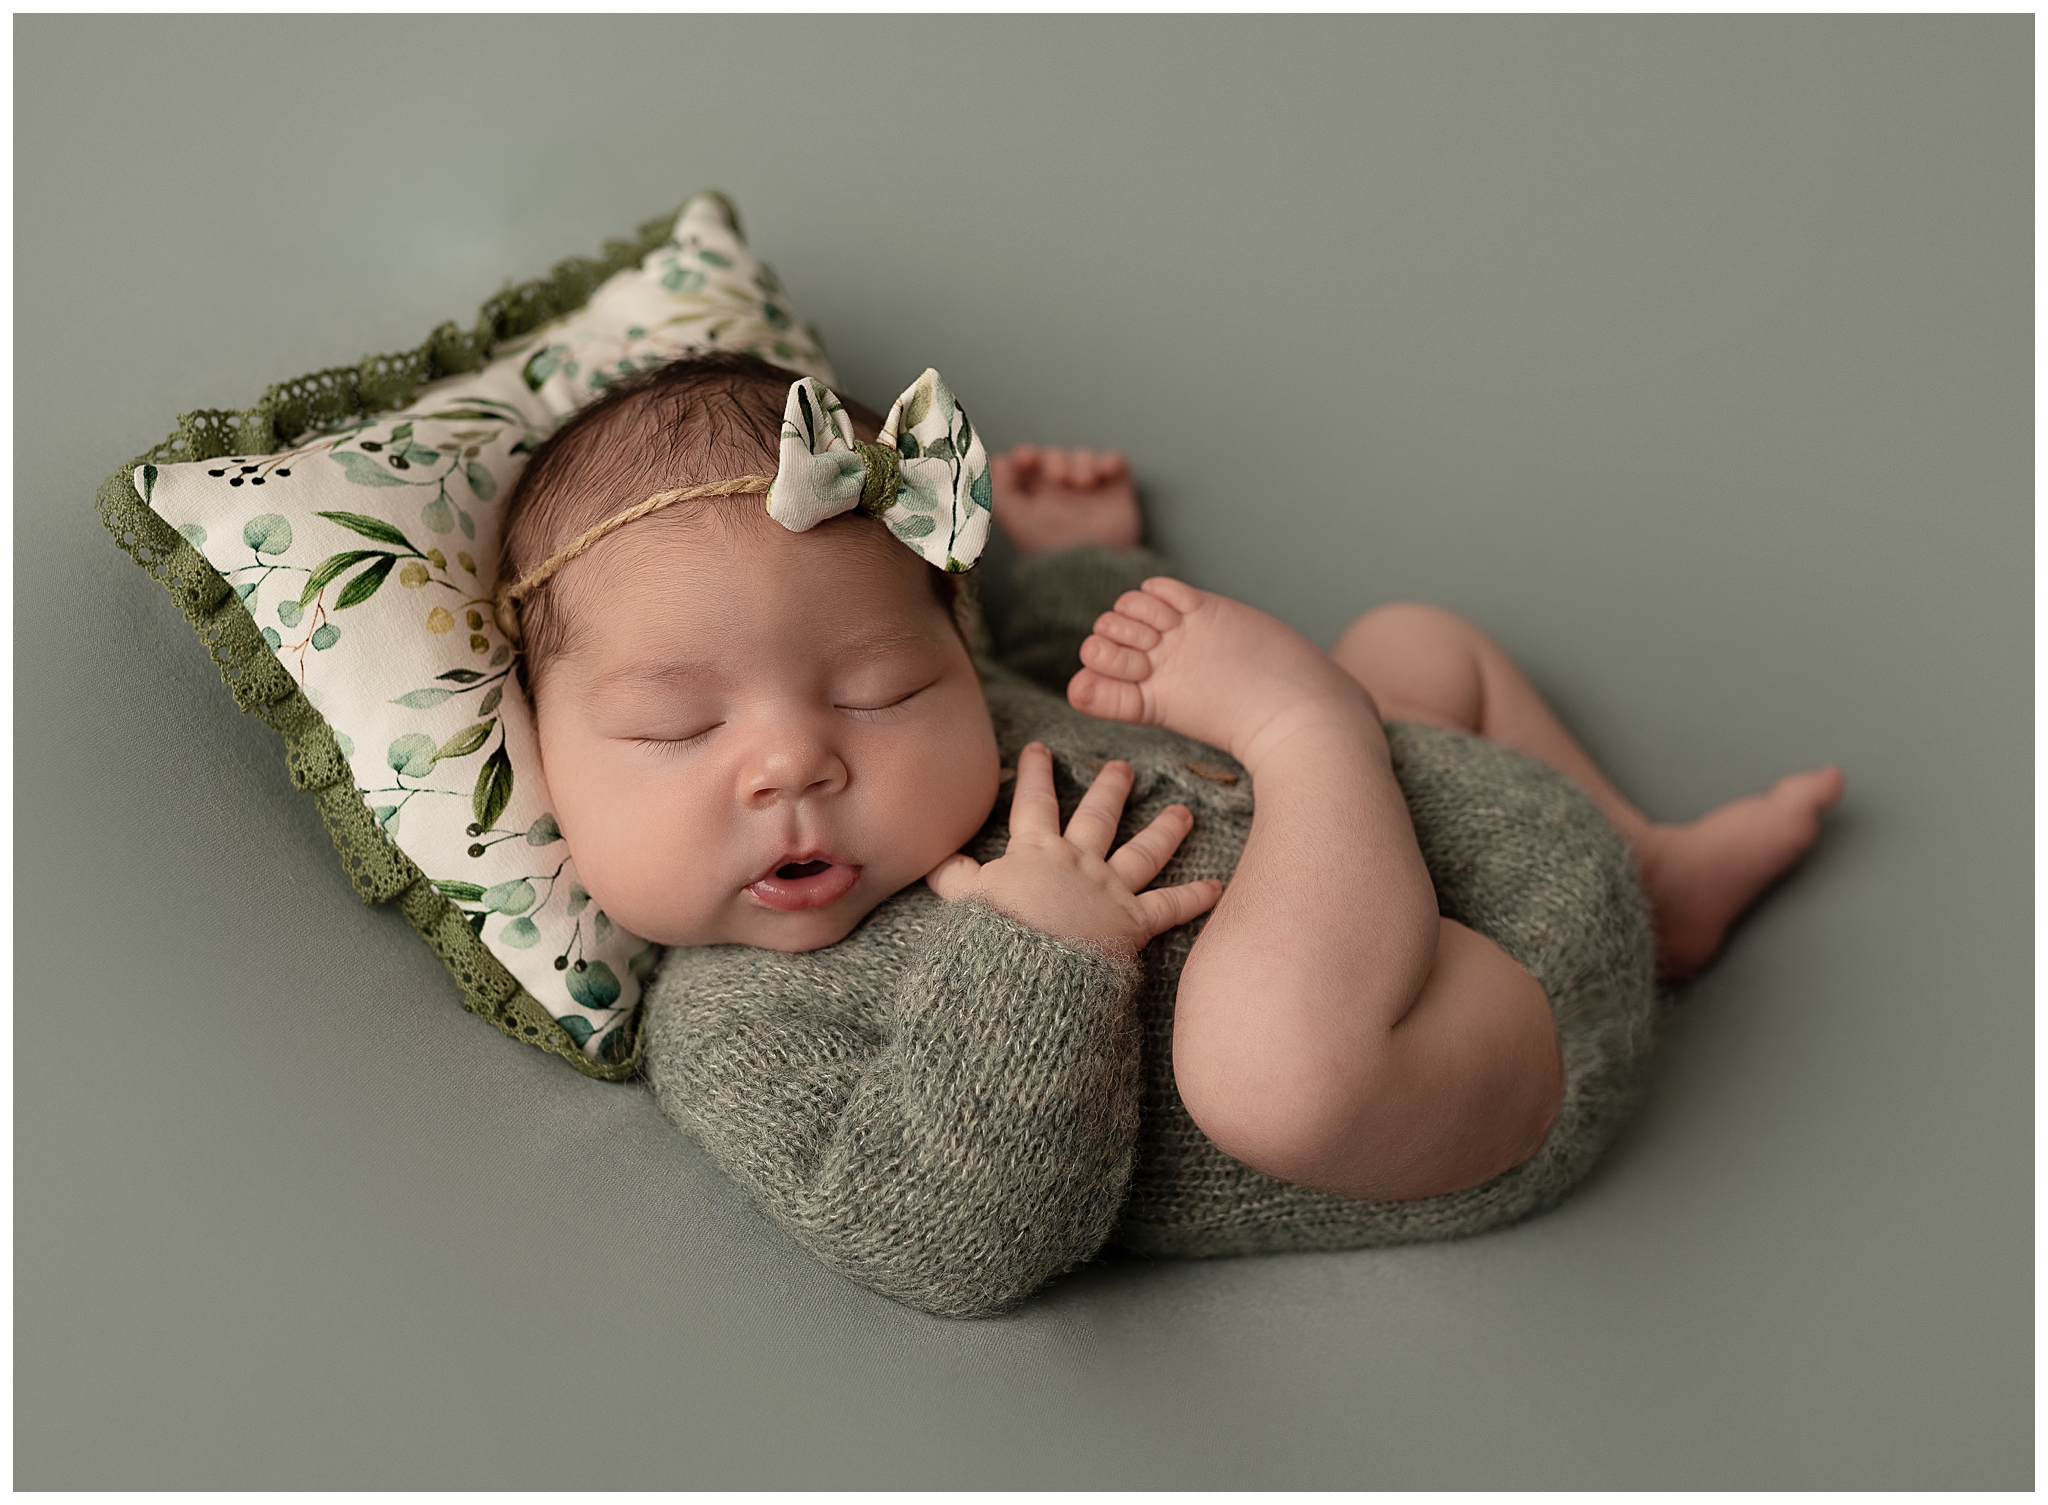 Baby wearing green knit romper sleeping on her back laying on green floral pillow with green floral bow on her head